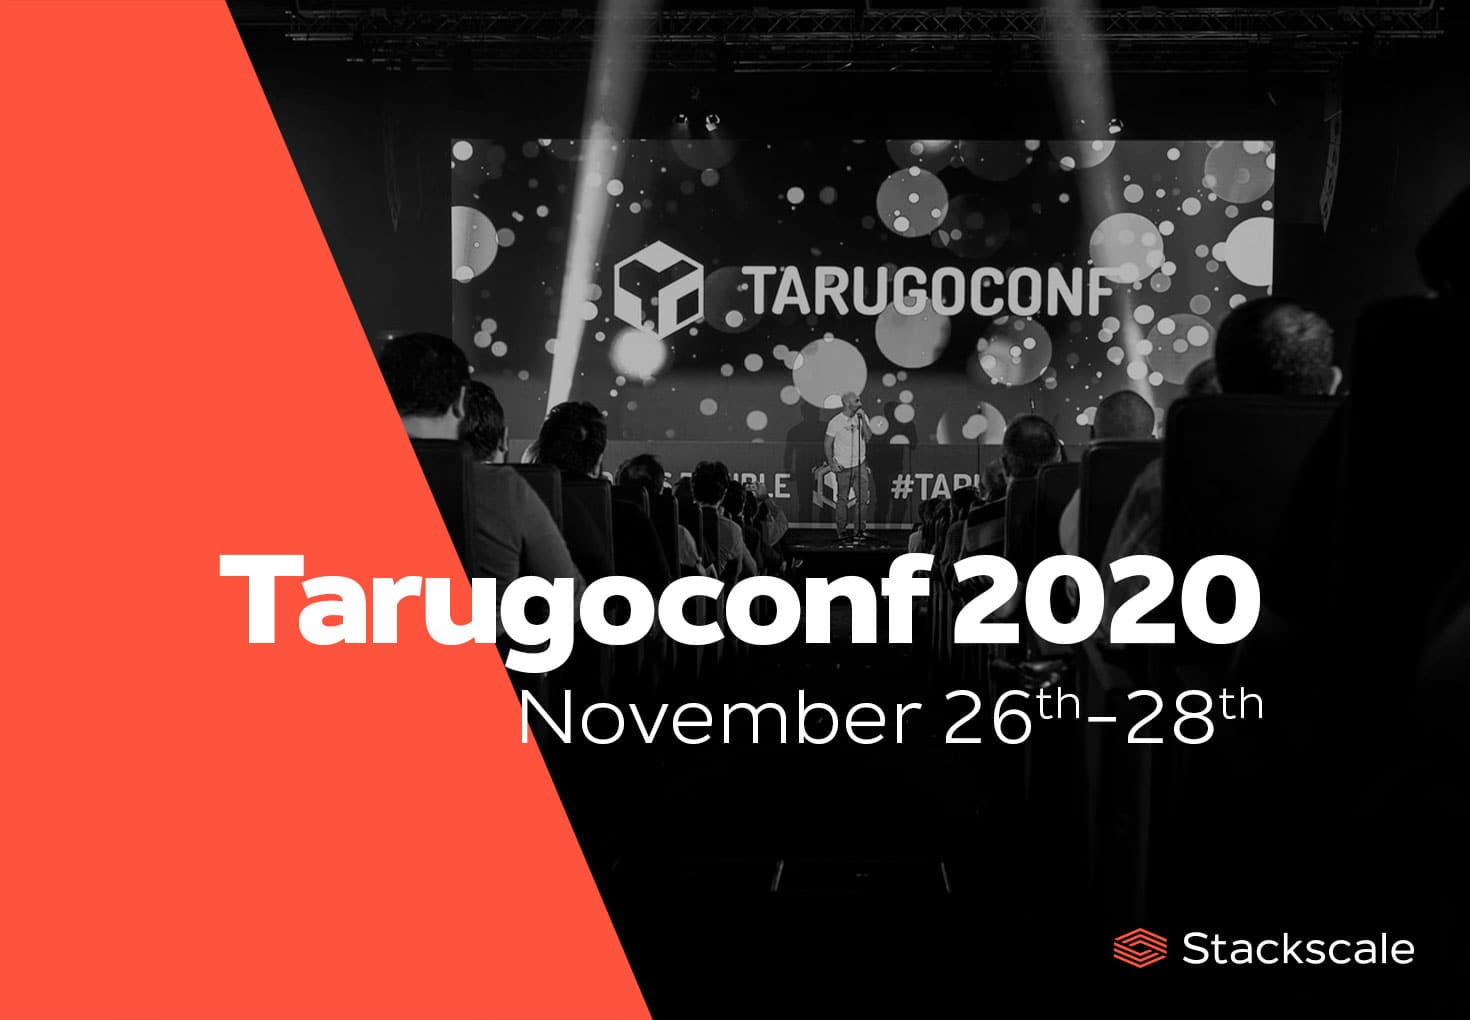 Tarugoconf 2020, tech and entrepreneurial event